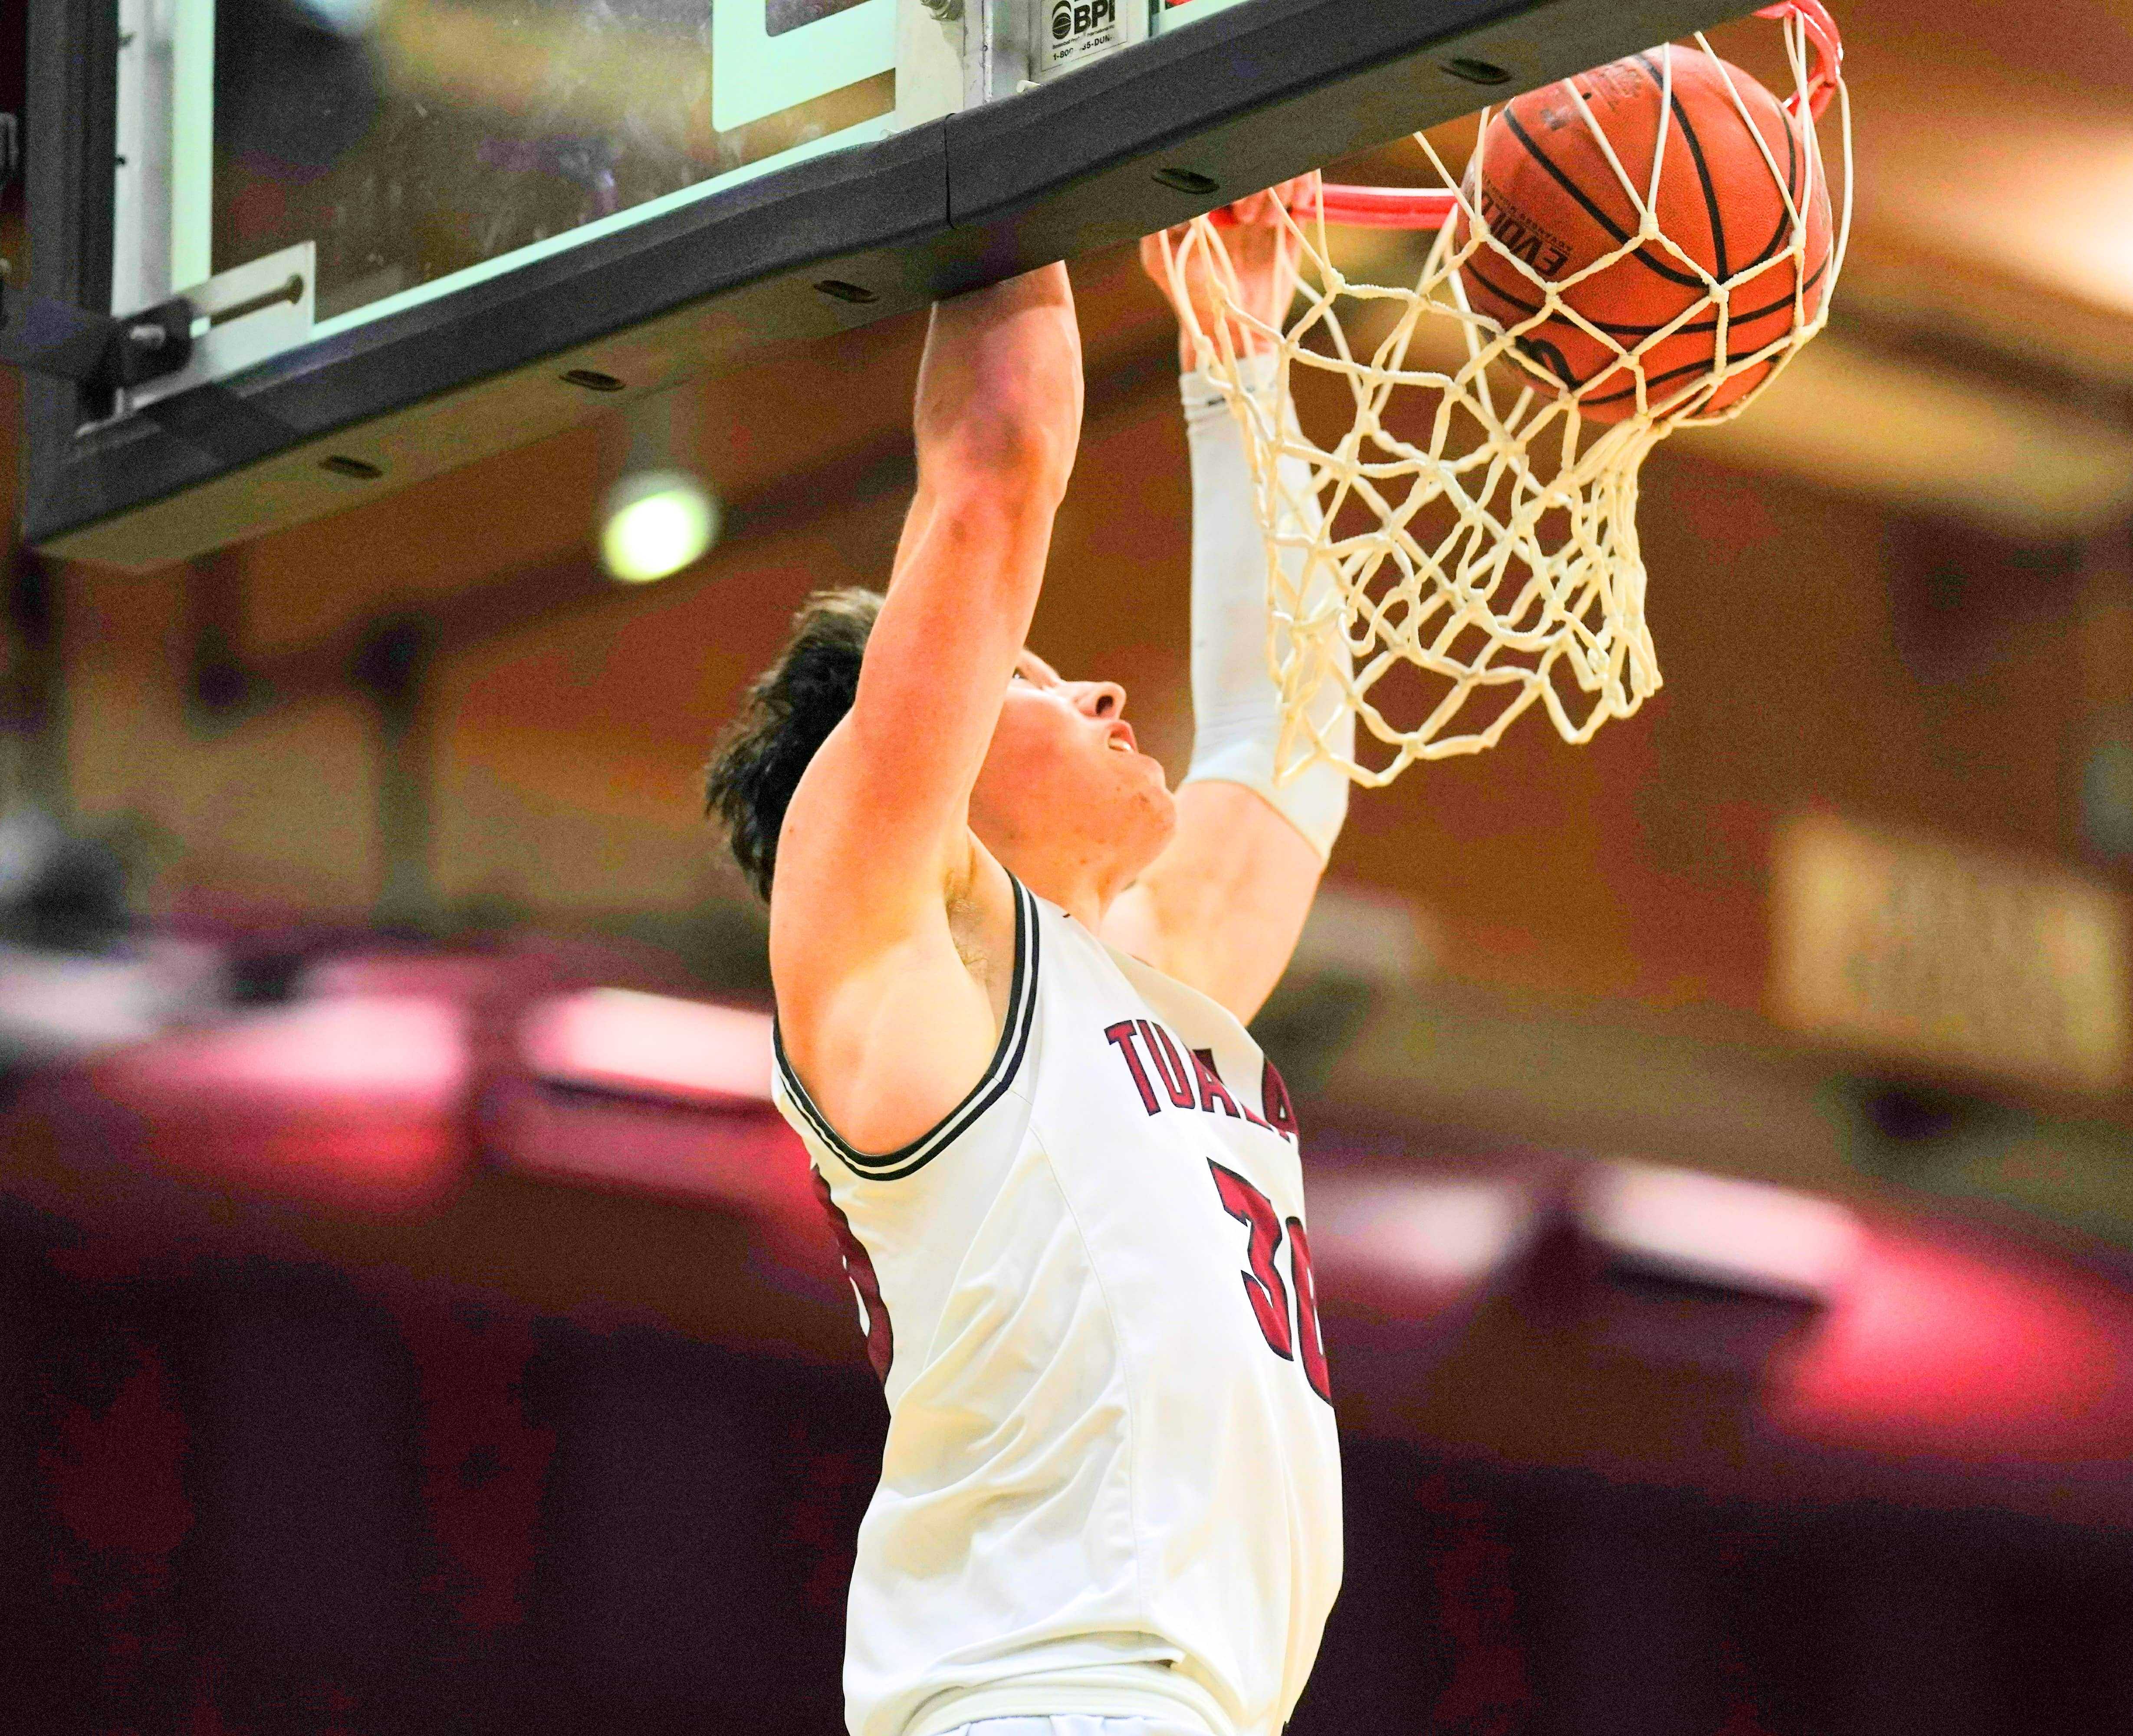 Tualatin's Kellen Hale goes up for a breakaway dunk in the final minutes of Friday's win over West Linn. (Photo by Jon Olson)